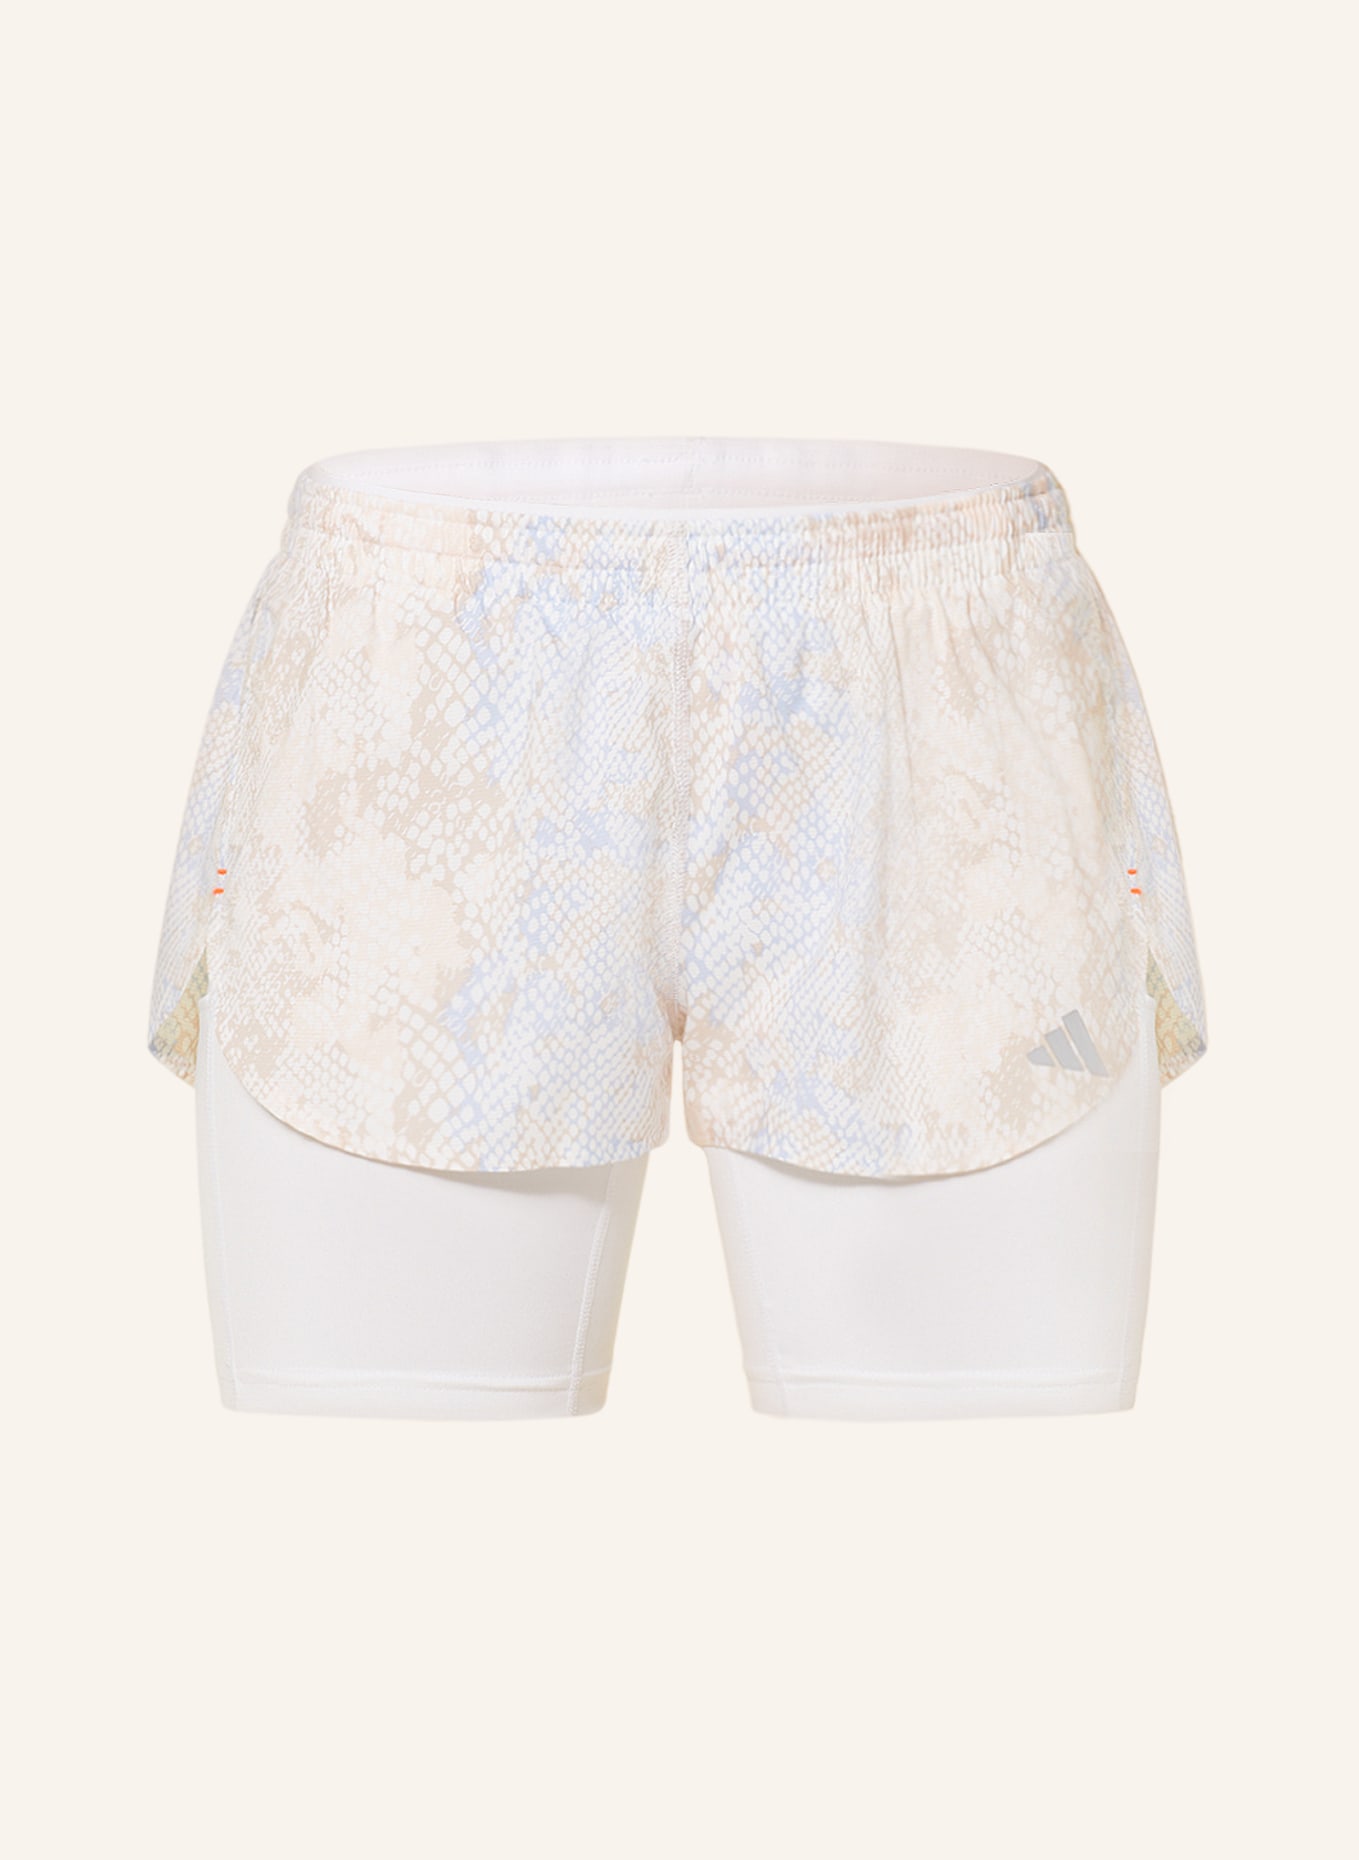 adidas 2-in-1 running shorts RUN FAST, Color: WHITE/ LIGHT BLUE/ LIGHT BROWN (Image 1)